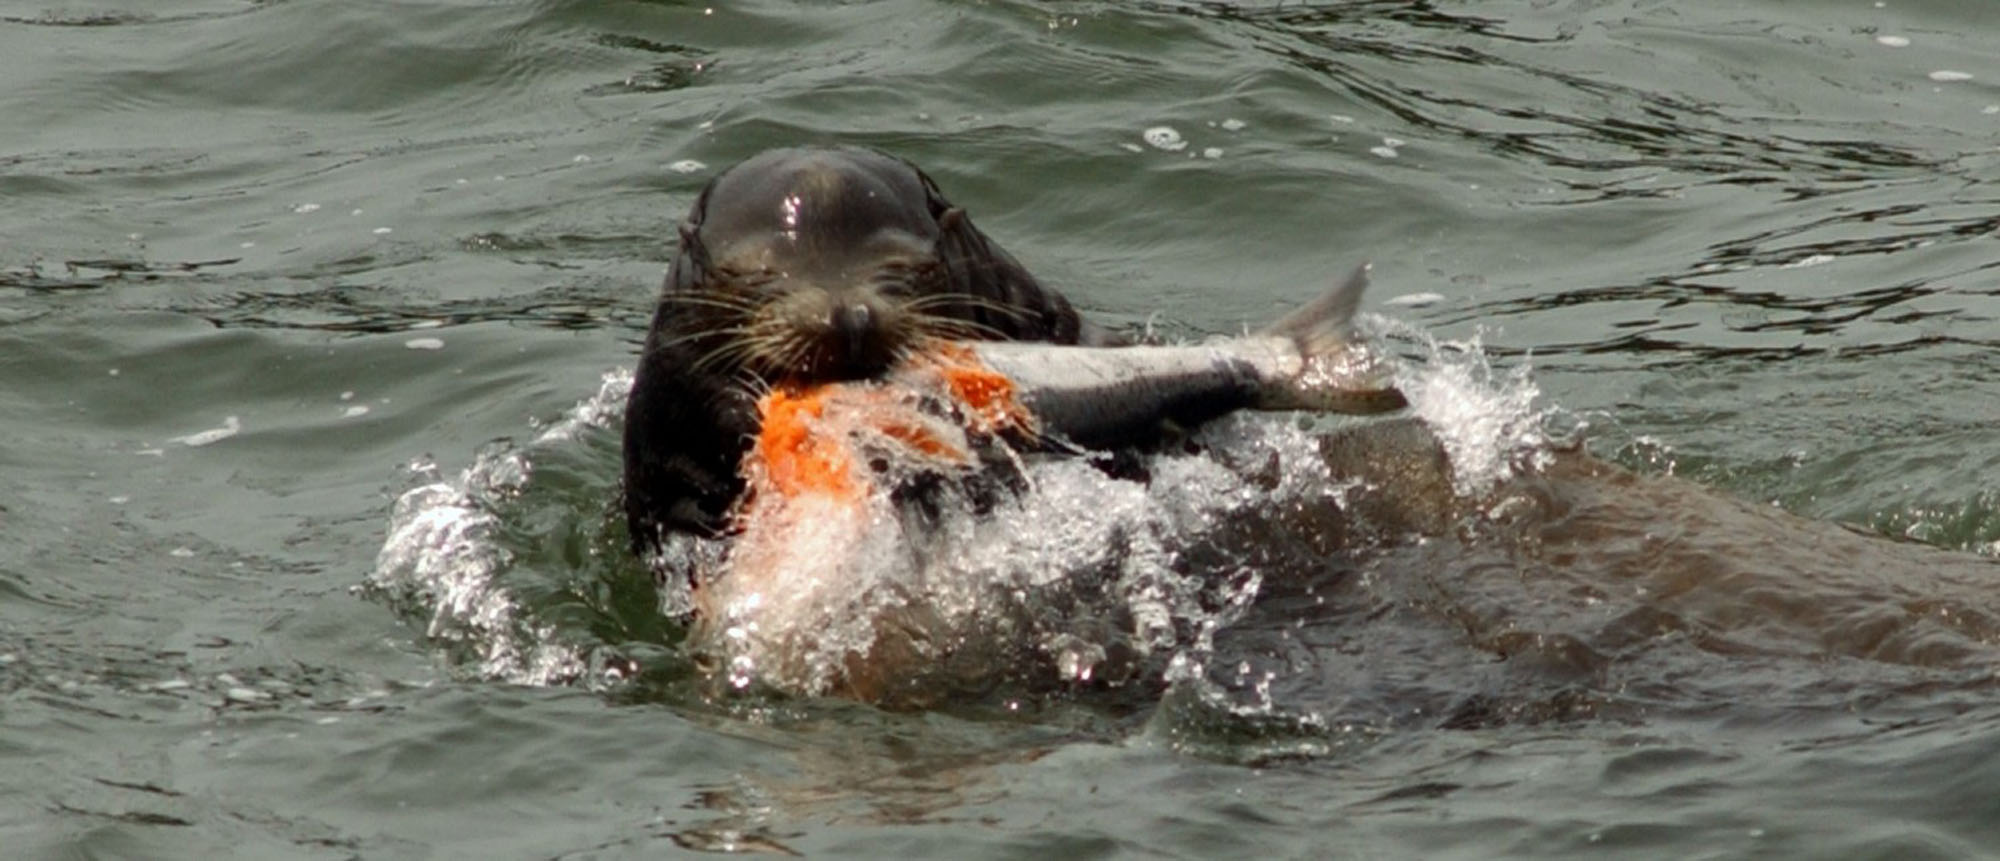 Sportsmen say sea lions now are in the lower Columbia River most months of the year.